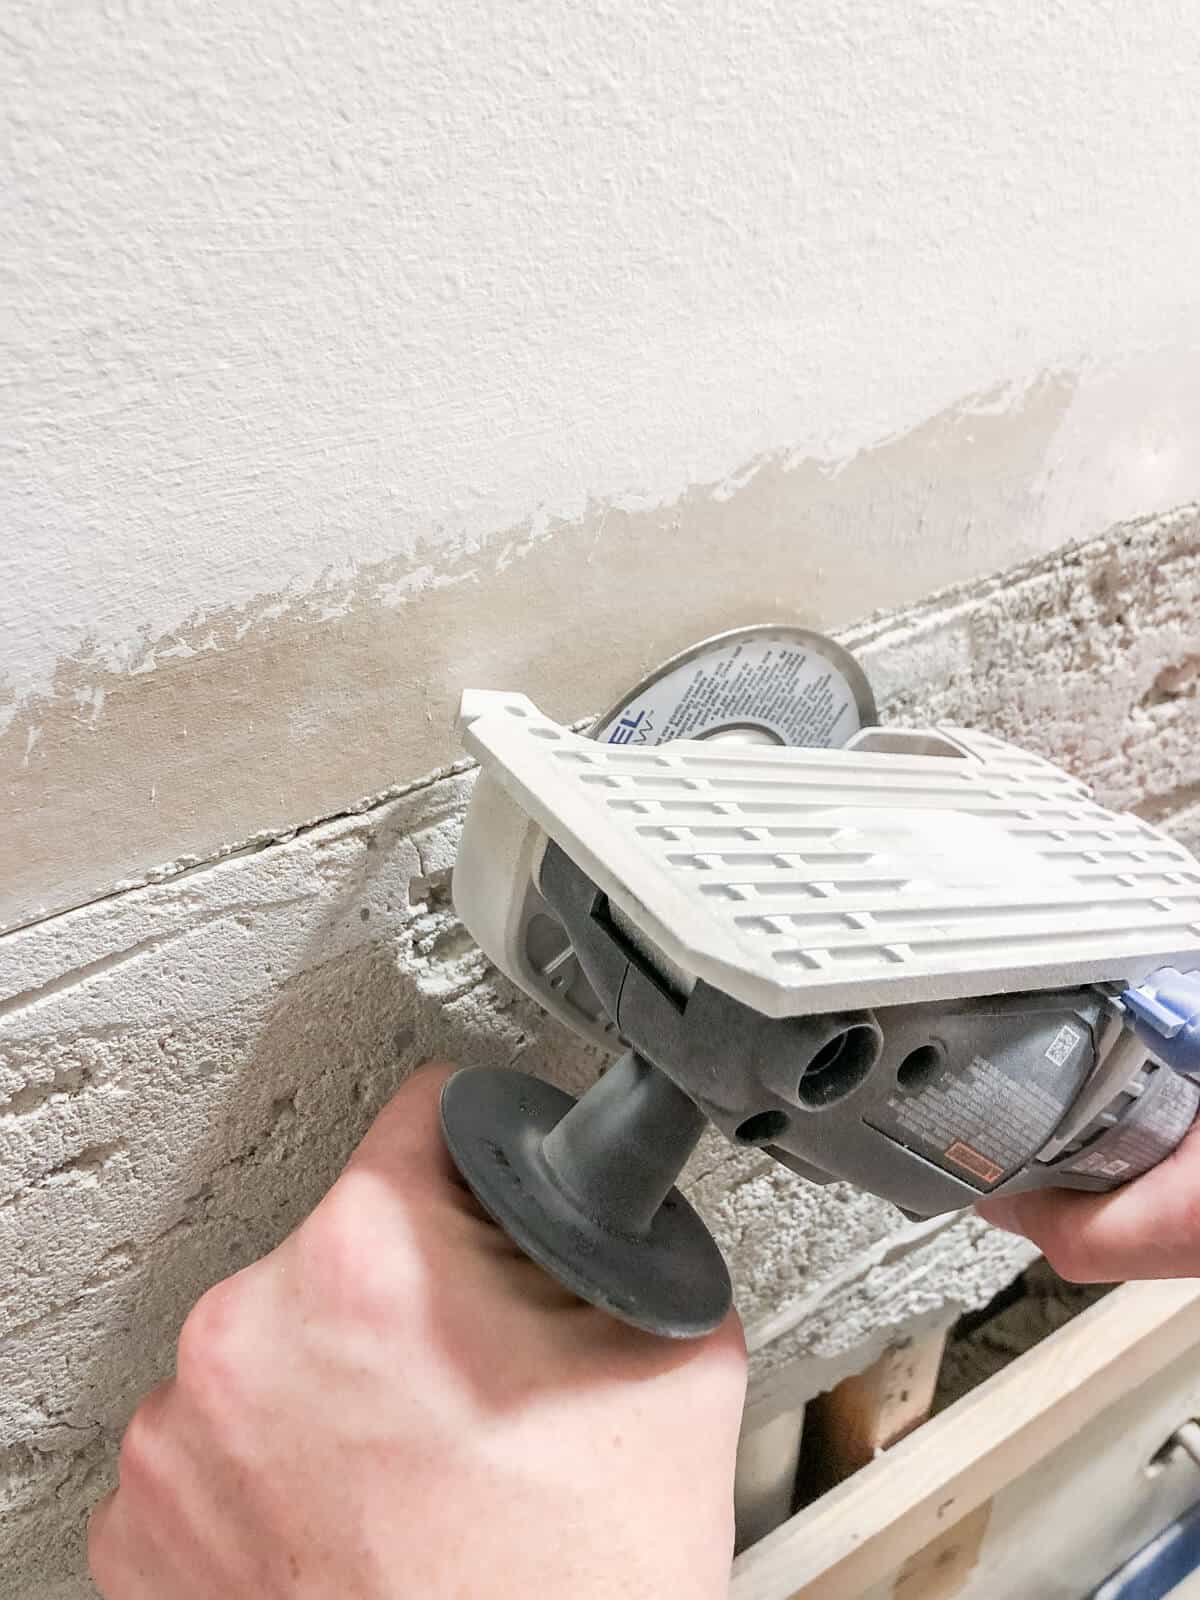 Dremel ultras grinding away old grout